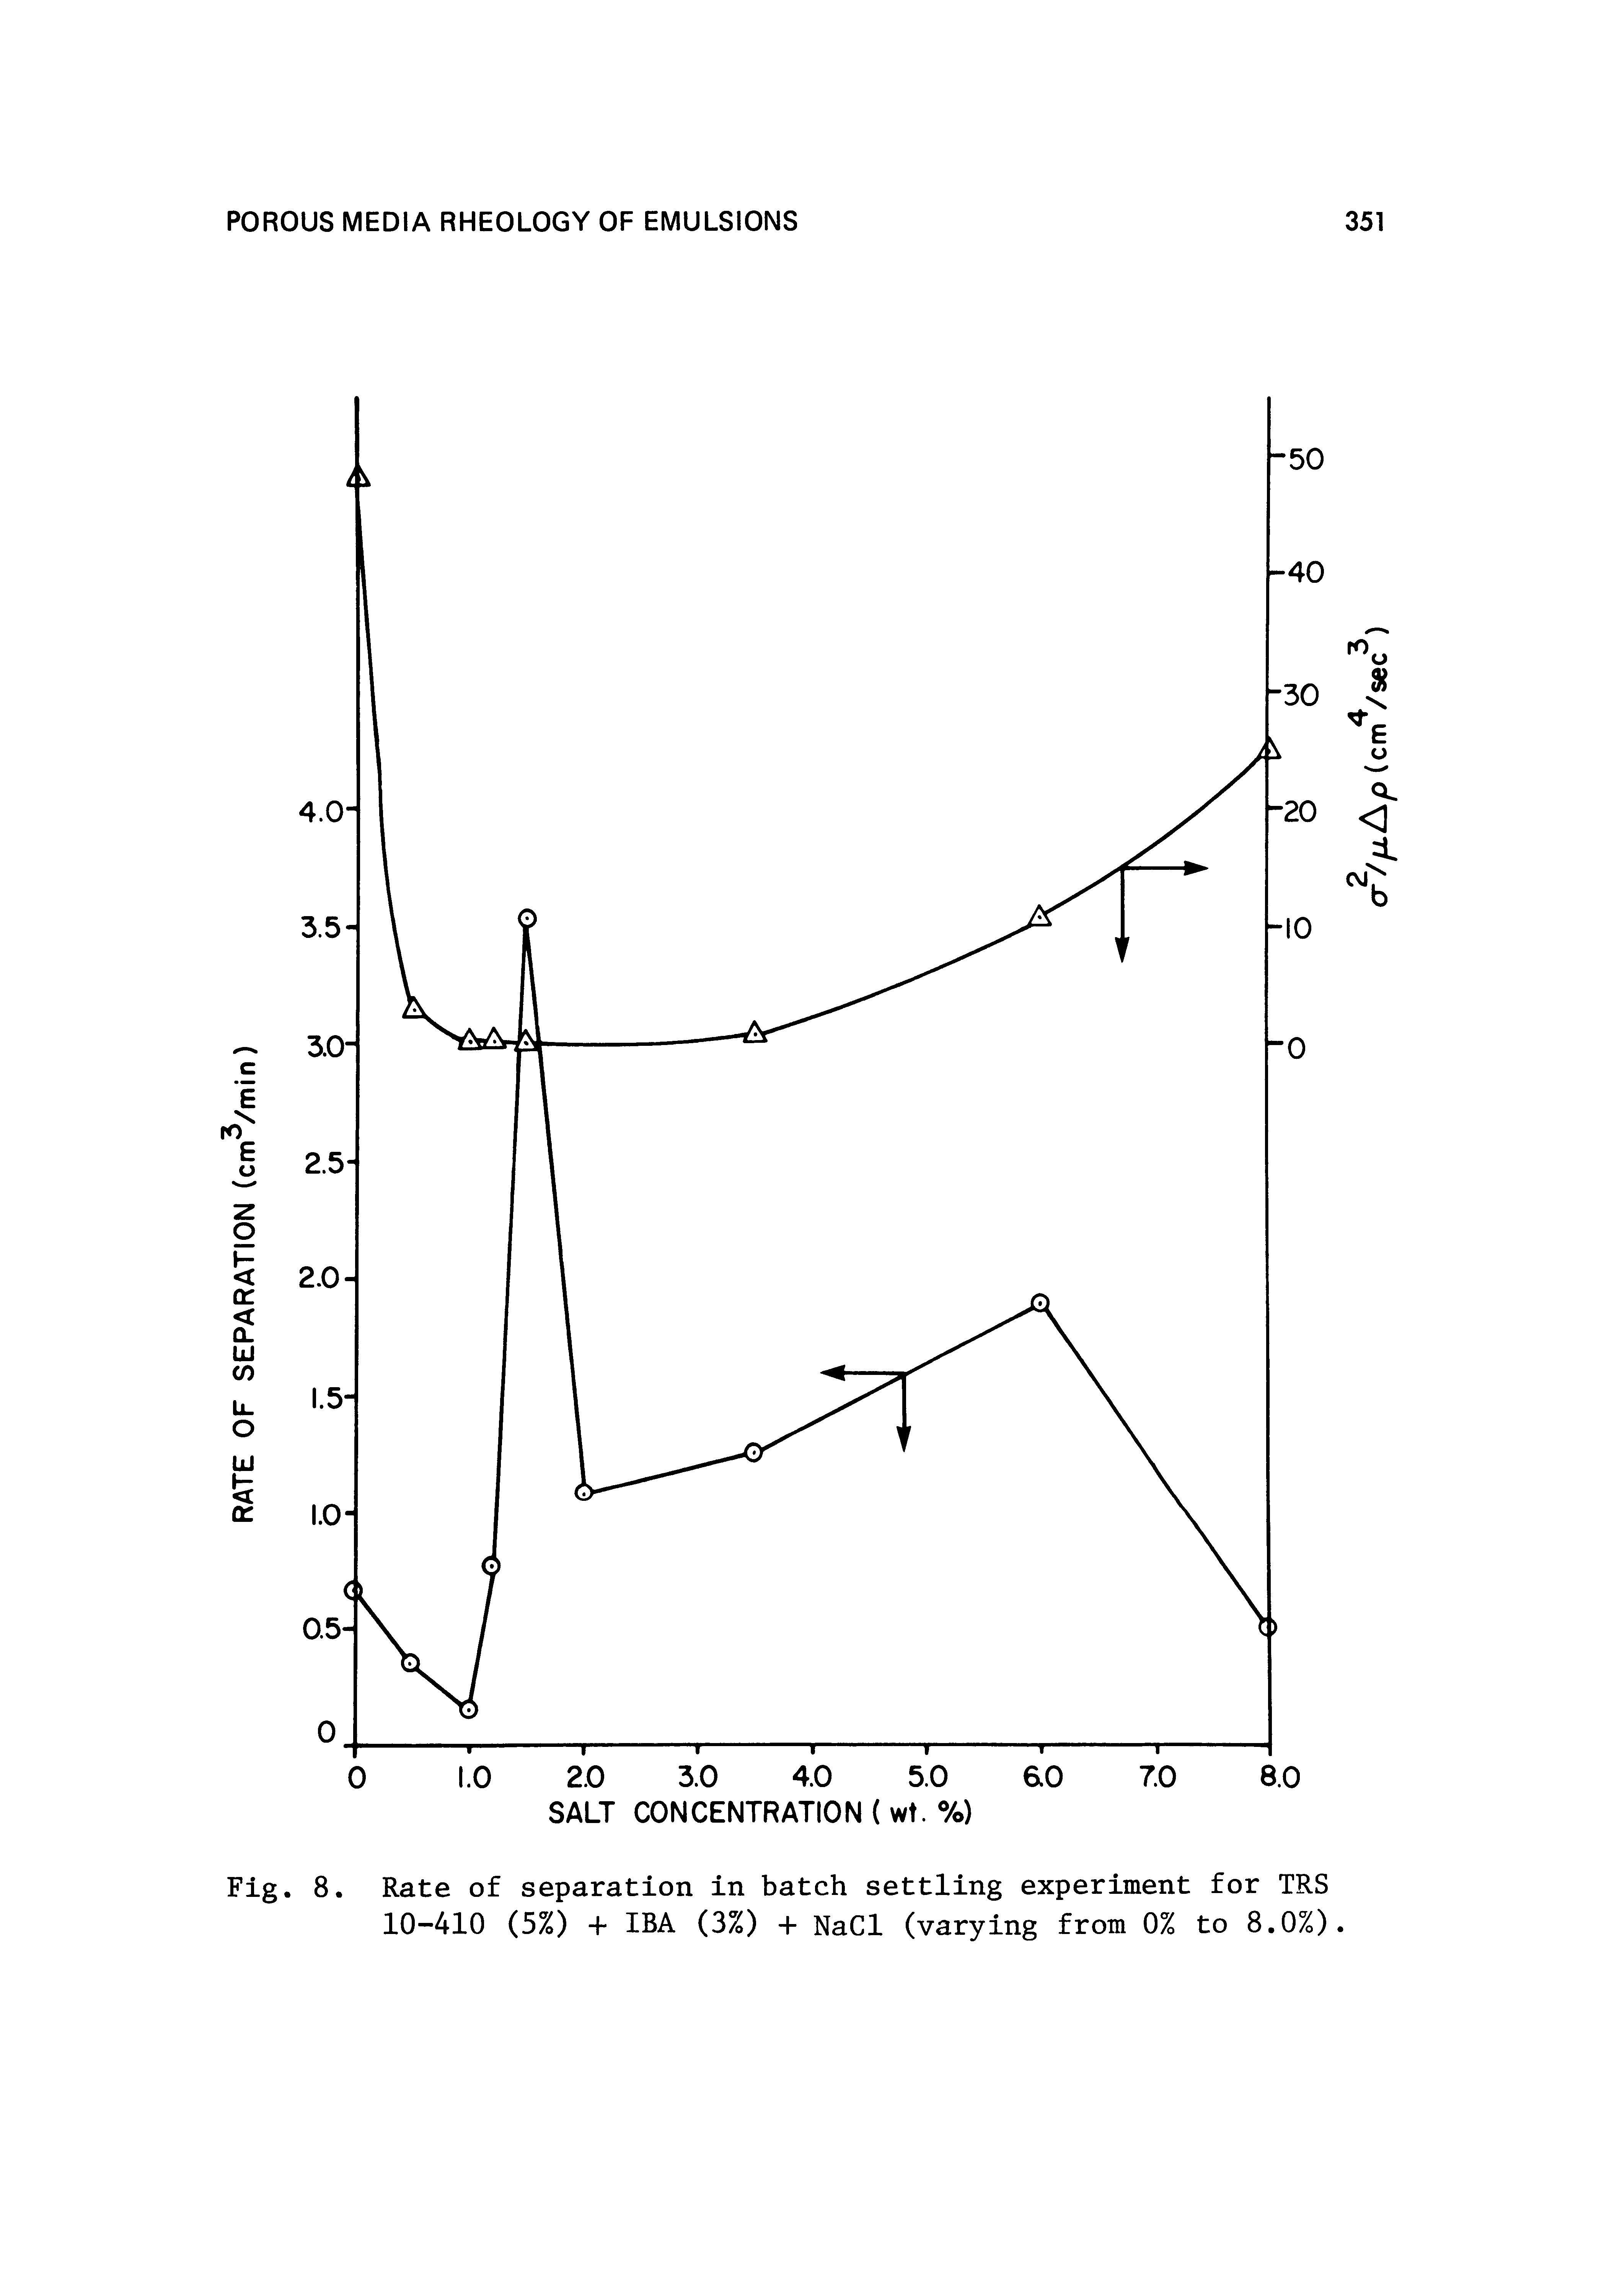 Fig. 8. Rate of separation in batch settling experiment for TRS 10-410 (5%) 4 IBA (3%) + NaCl (varying from 0% to 8.0%)<...